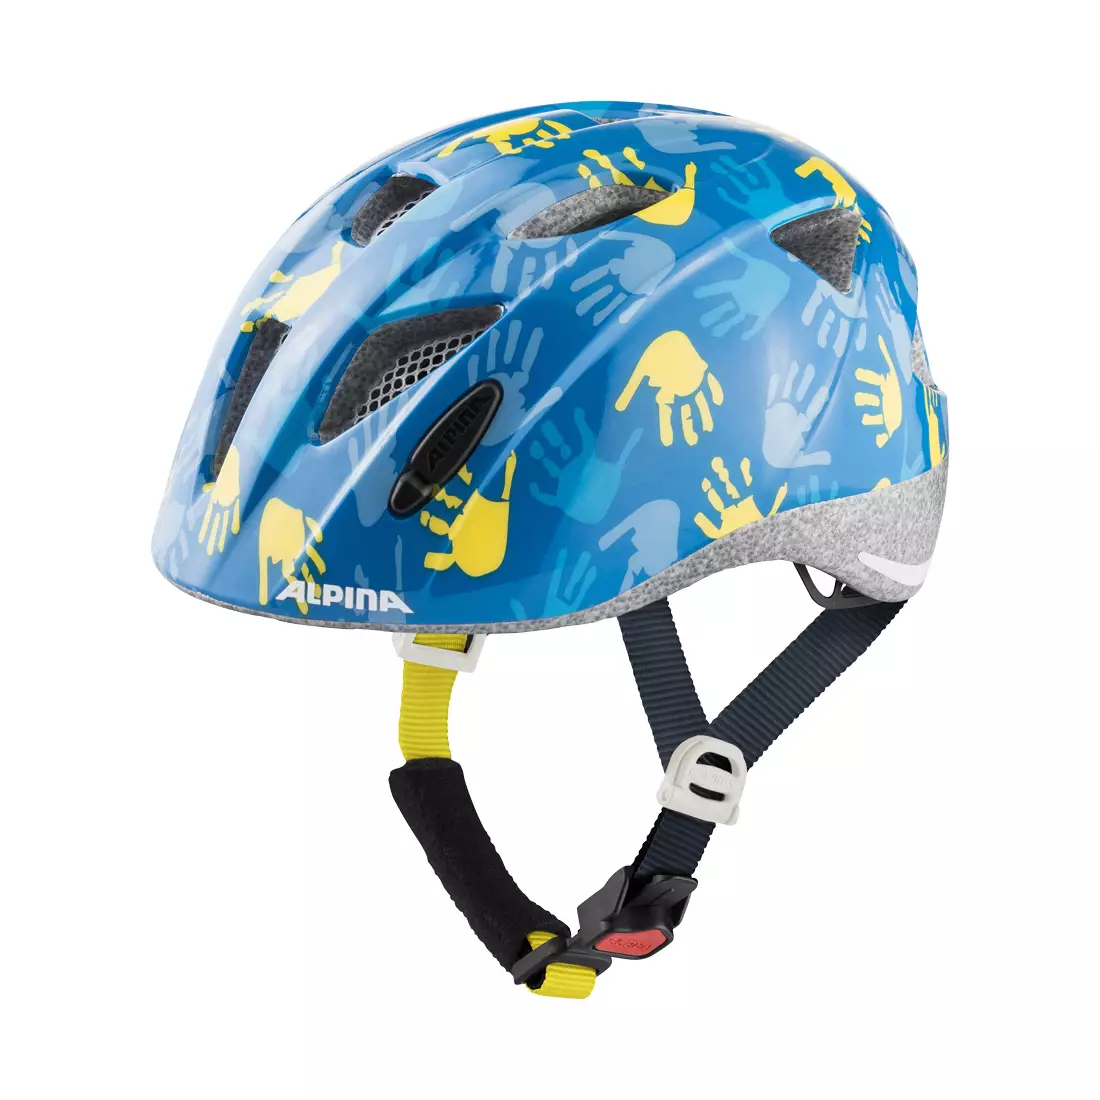 ALPINA KASK ROWEROWY XIMO  BLUE HANDS GLOSS 47-51